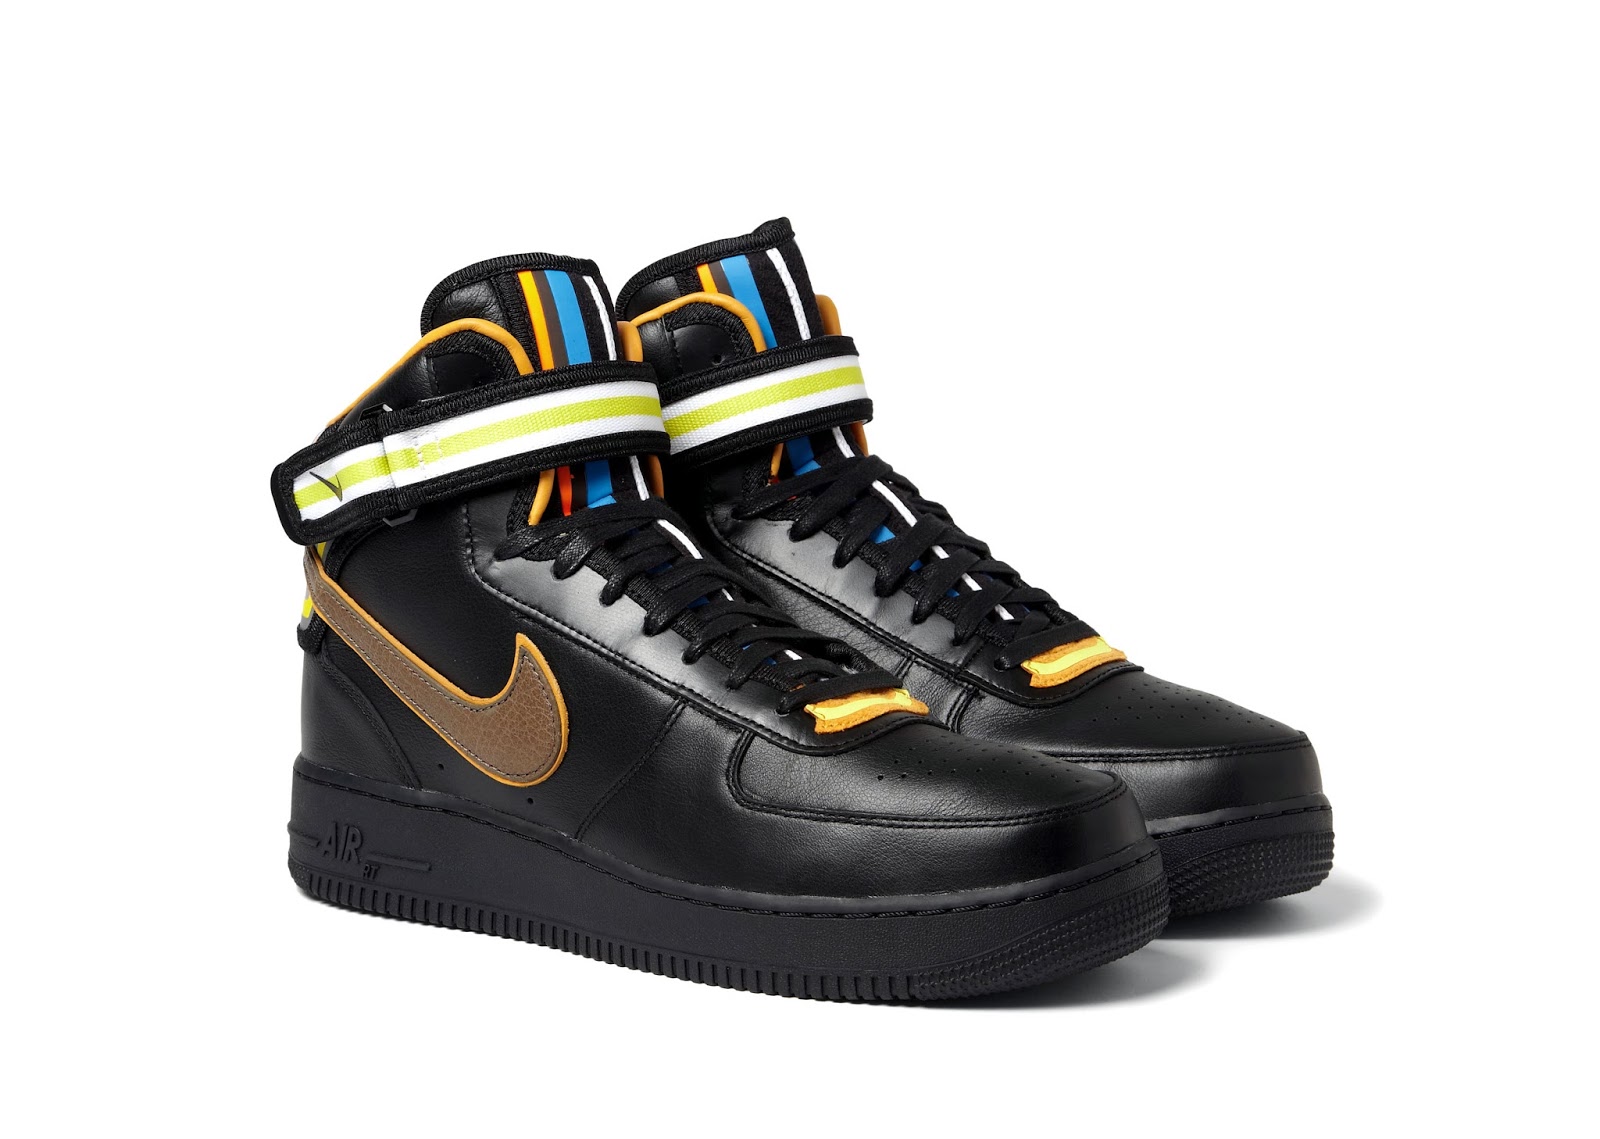 FASHION | Riccardo Tisci x Nike Air Force 1 'Black' Collection | Cut and  Copy | Hong Kong Fashion and Streetstyle Blog